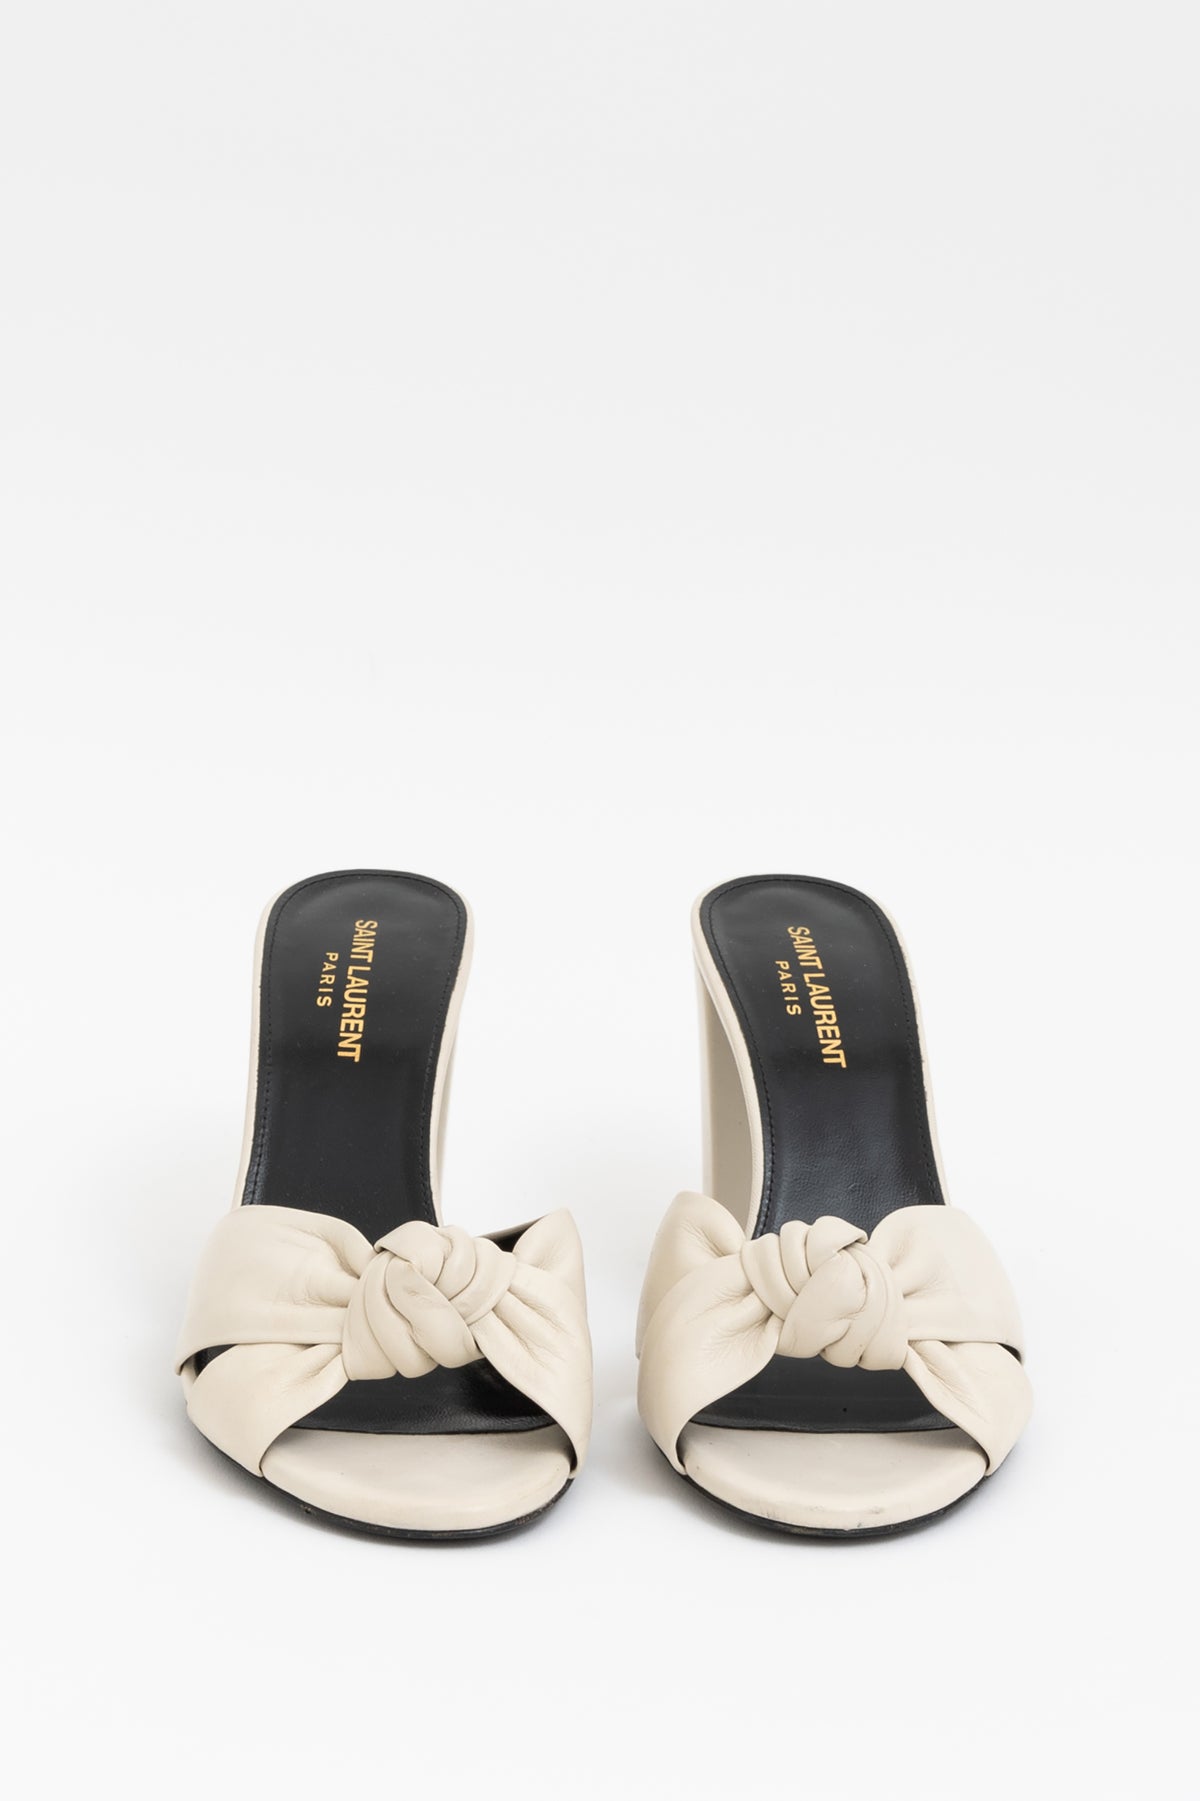 Bianca Knotted Leather Mules